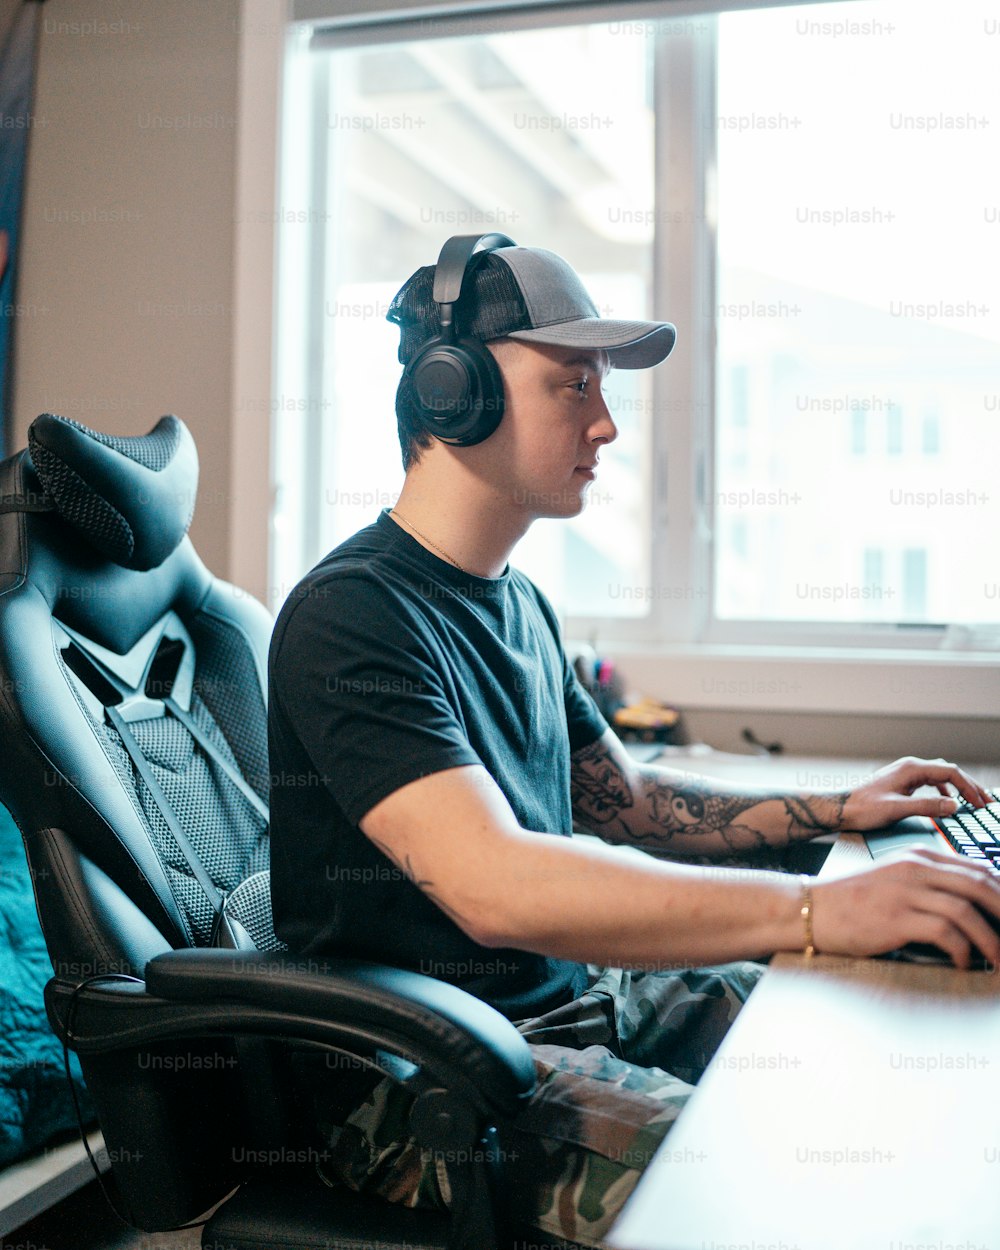 a man sitting in front of a computer wearing headphones